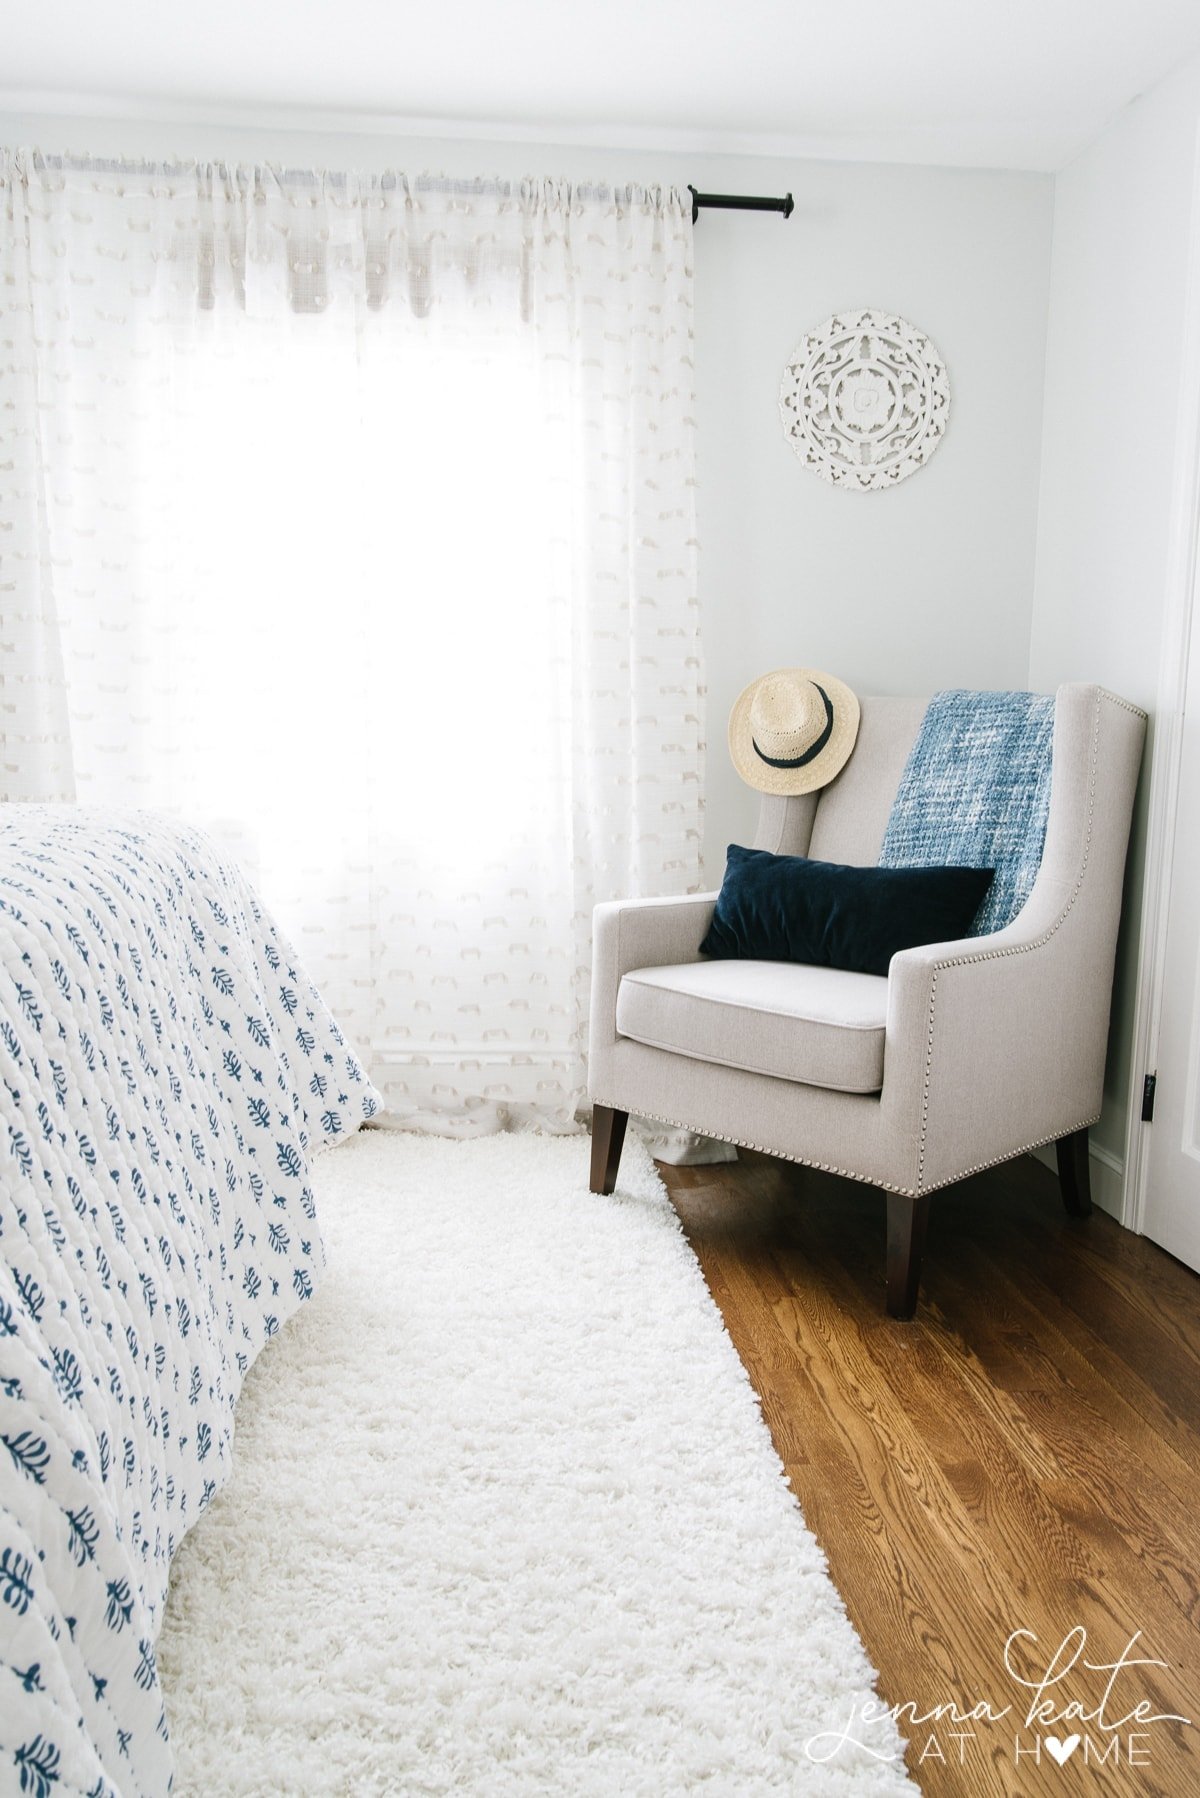 Simple 2019 summer decor ideas for the master bedroom